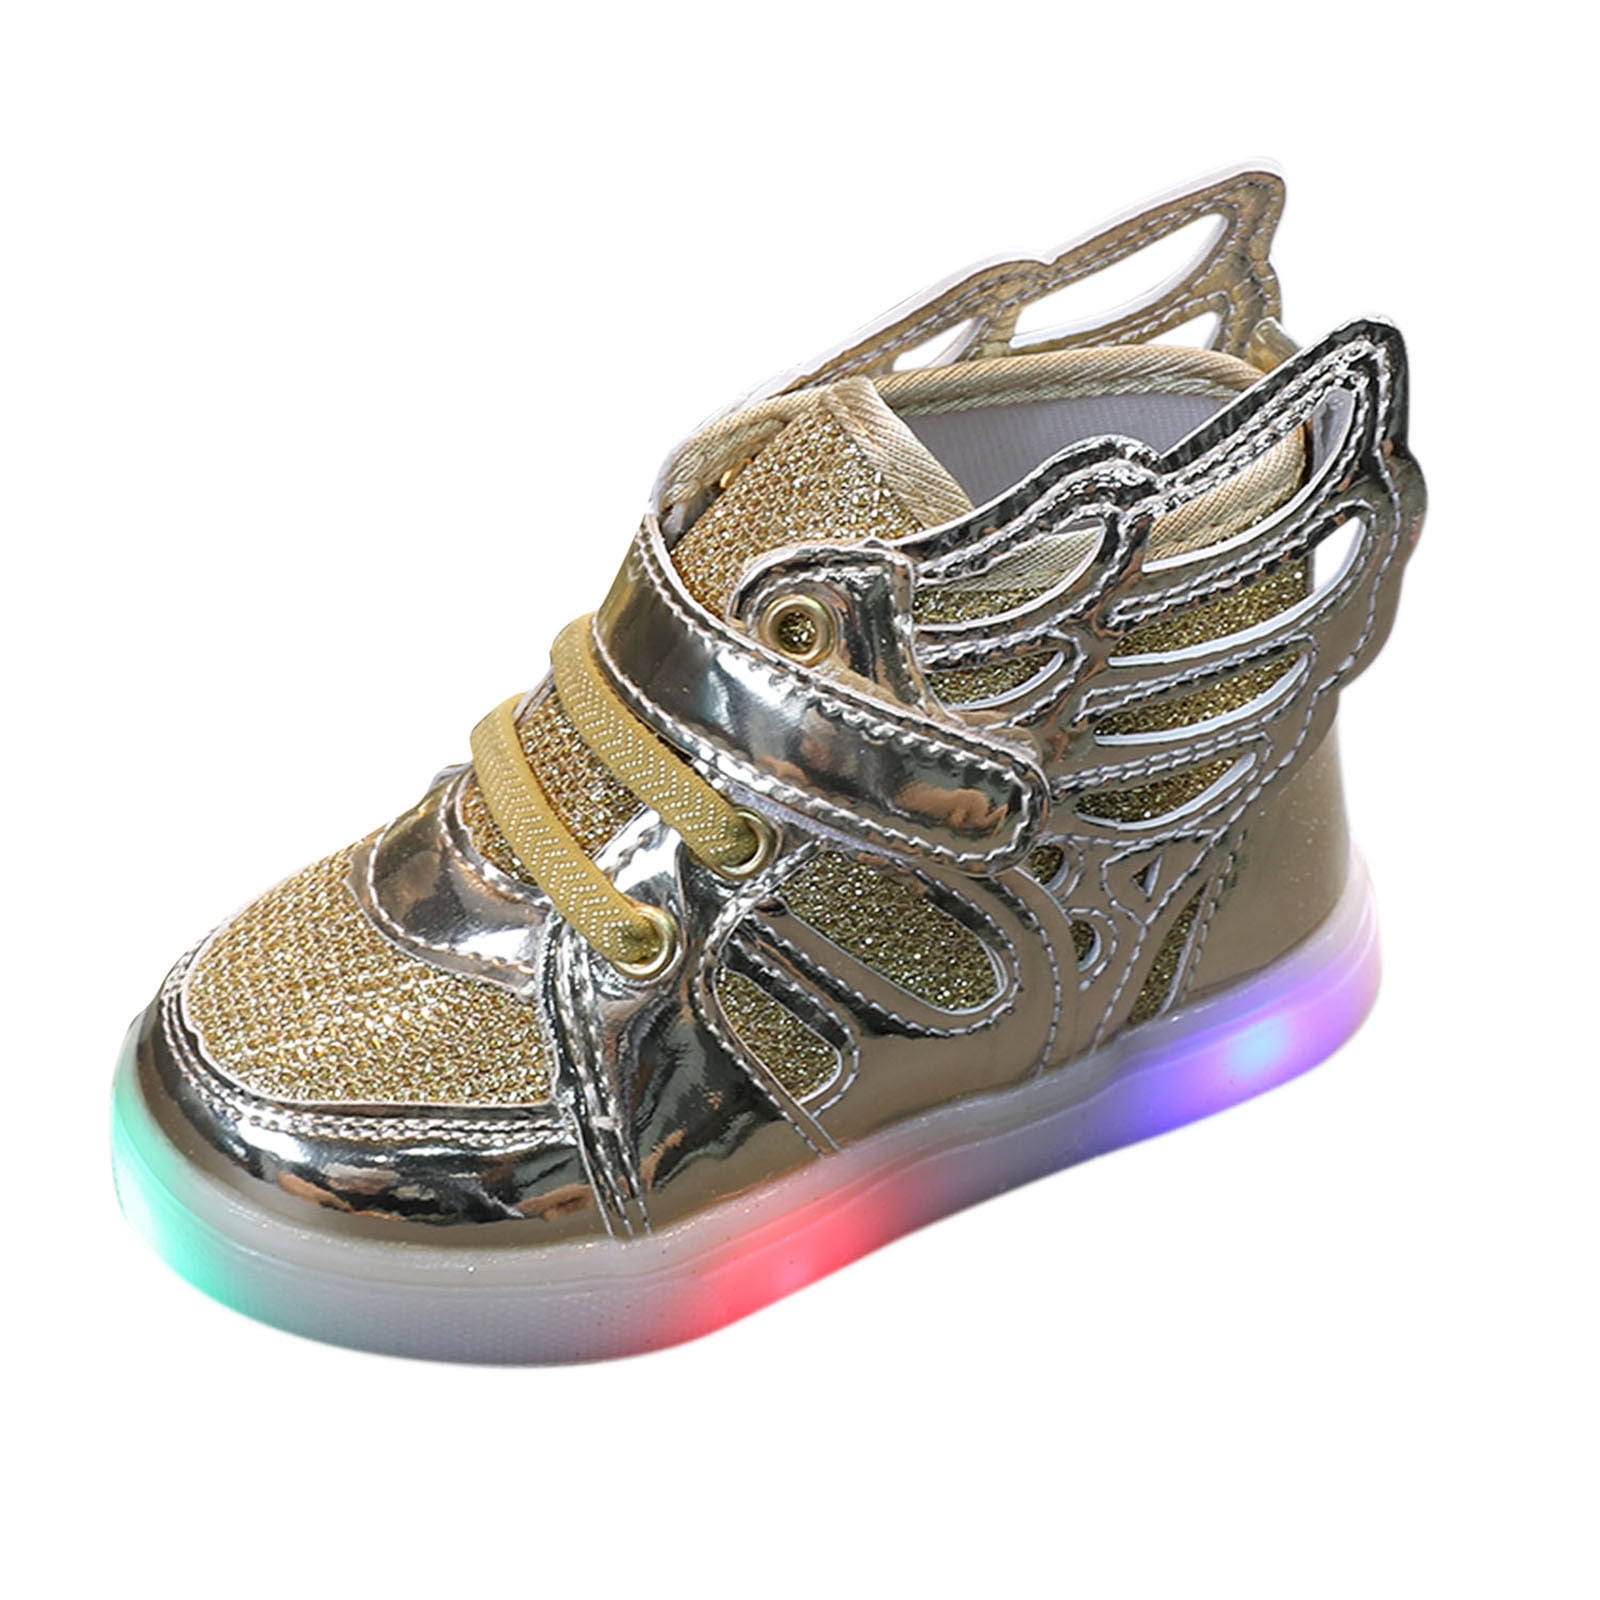 Odema Girls Boys Light Up Hightop LED Sneakers Ankle Boots Gold Size US10 Toddler